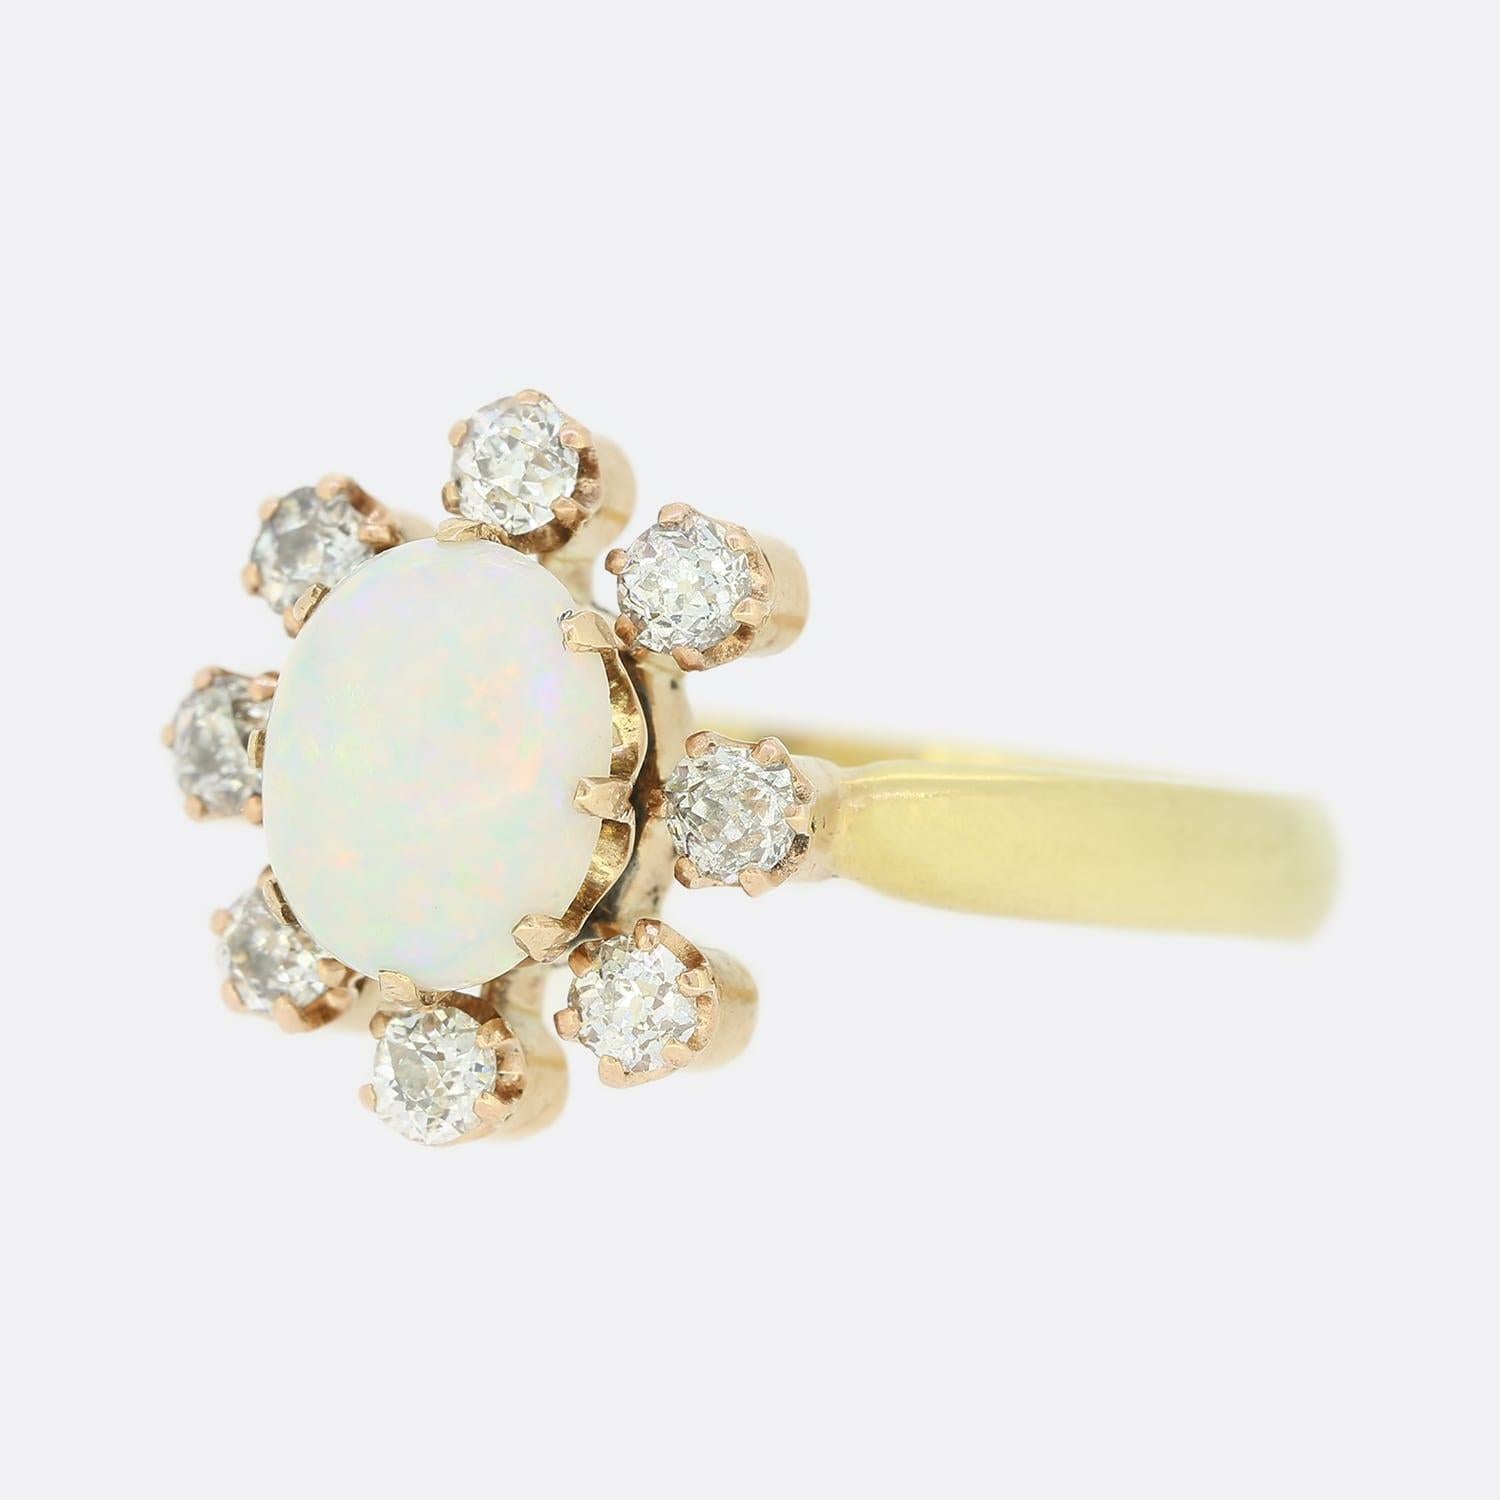 This vintage 18ct yellow gold ring plays host to an oval opal surrounded by 8 old cut diamonds. The opal has a wonderful play of colour and is a highly desirable tone.
The ring was masterfully converted from a Victorian stick pin by the antique